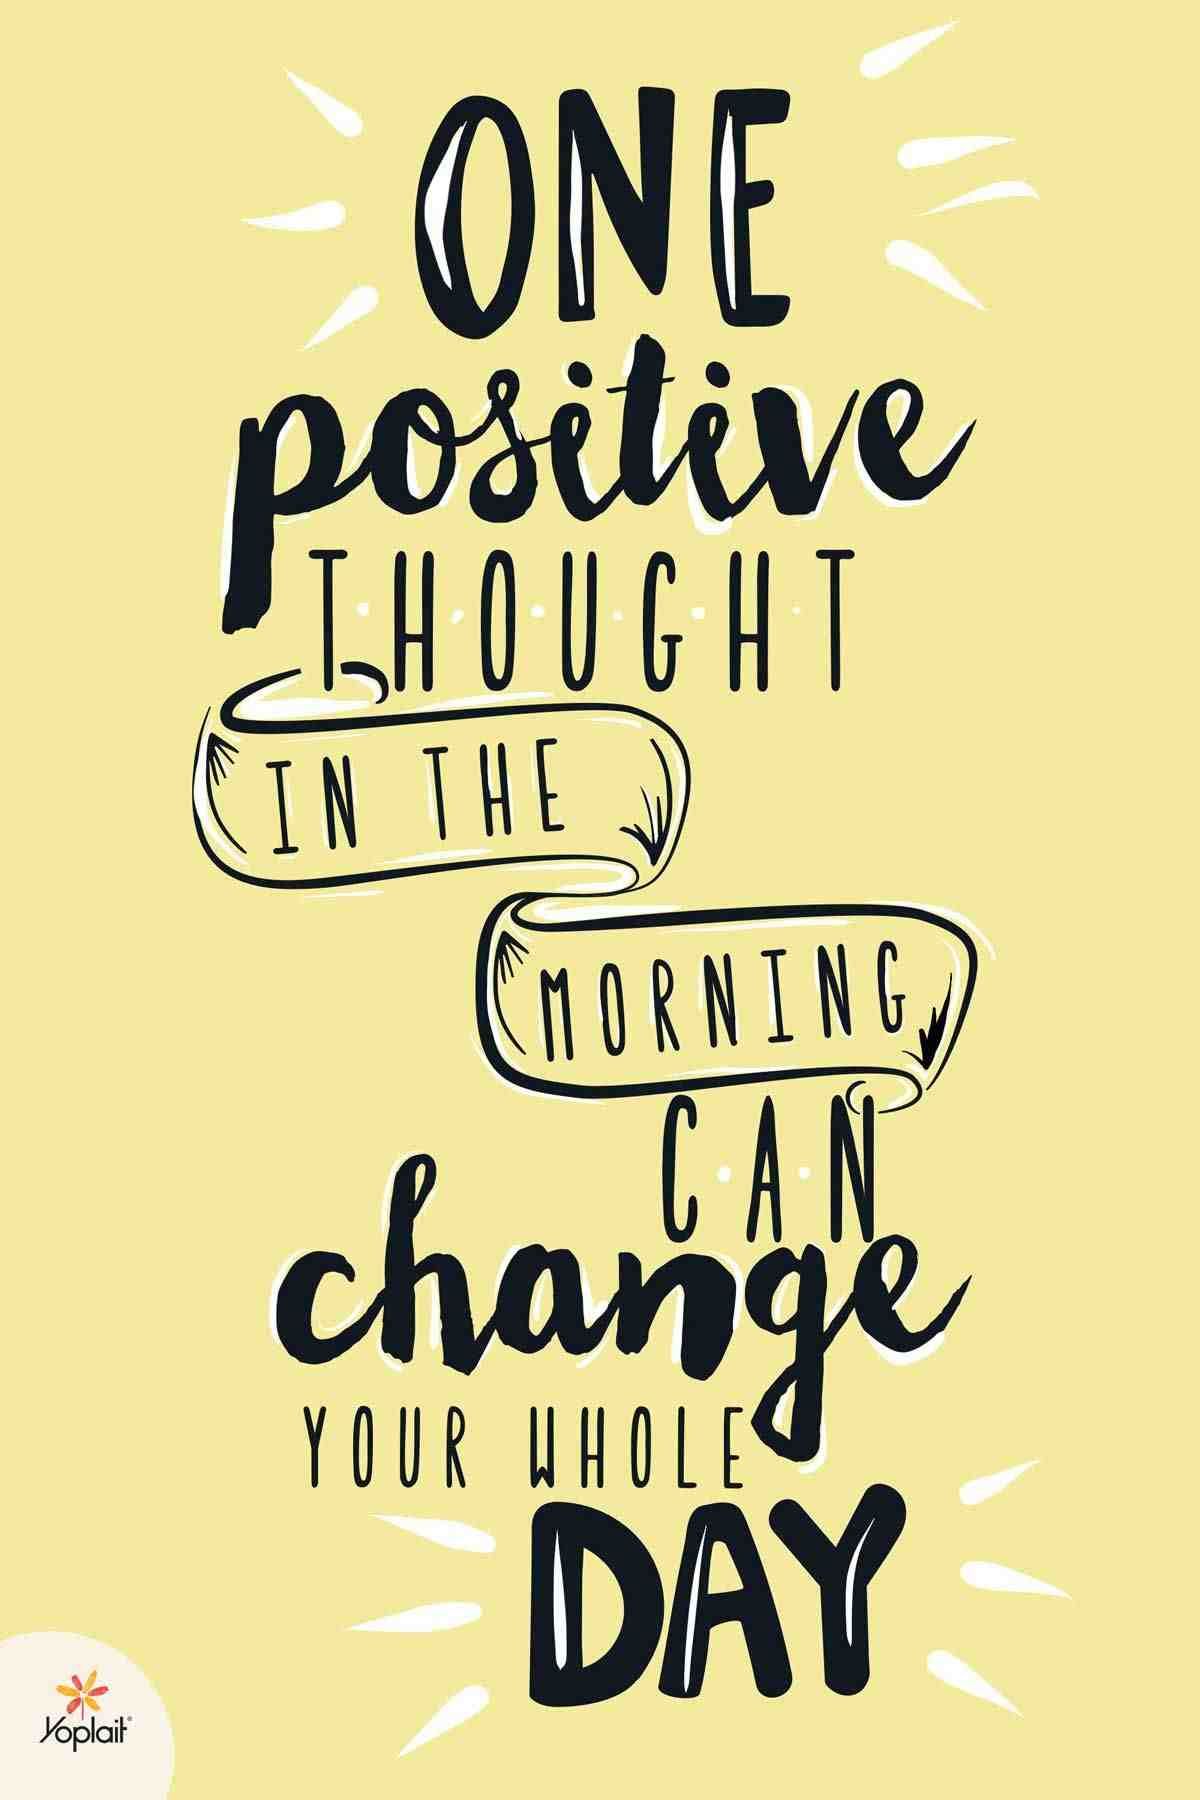 one-positive-thought-in-the-morning-can-change-your-whole-day